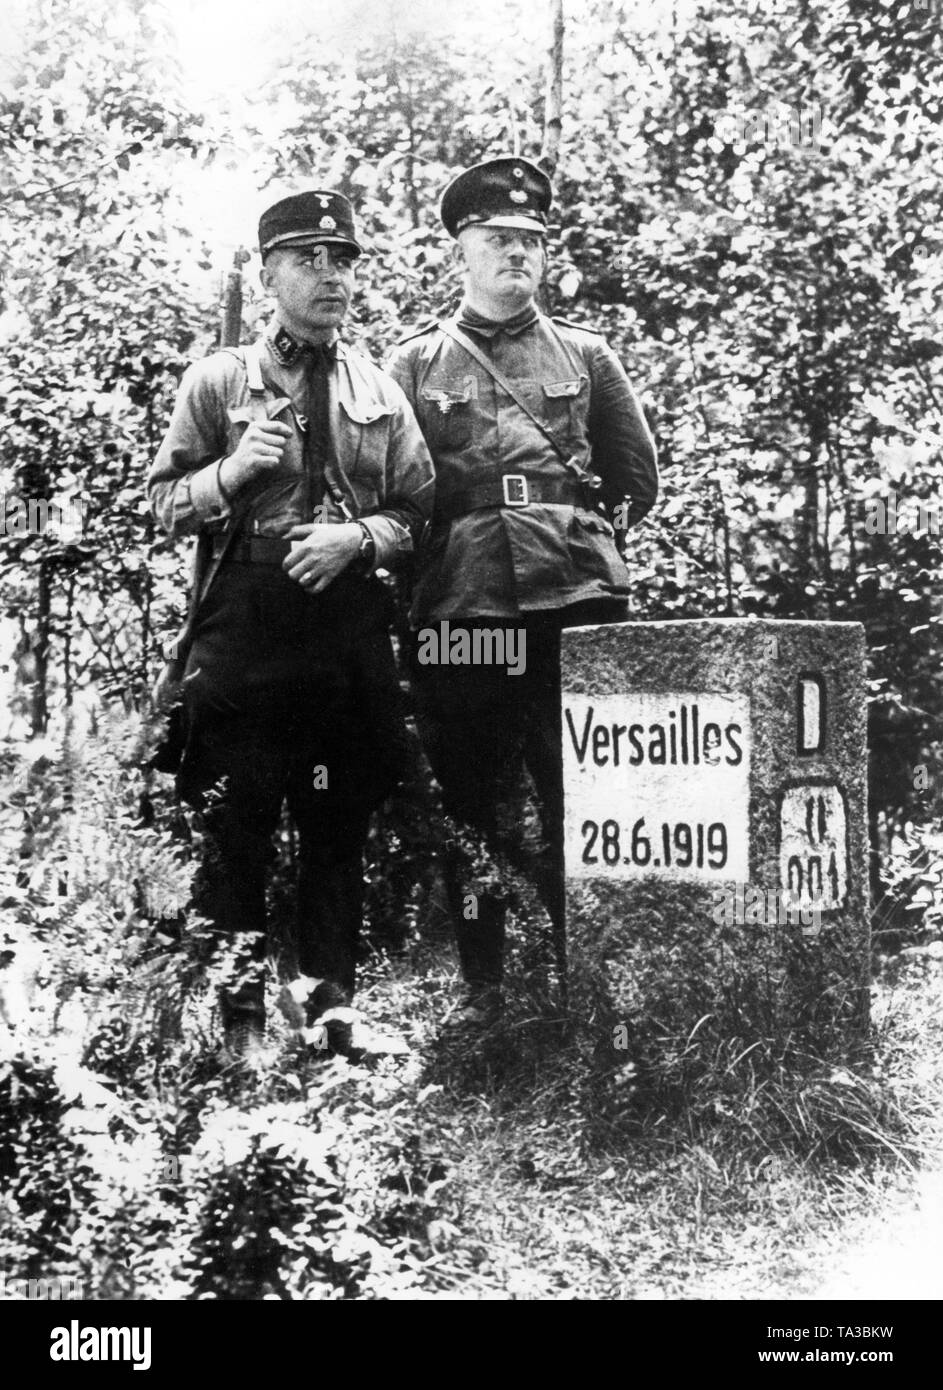 The inscription on the stone points to the demarcation of the Treaty of Versailles, which was unacceptable to the Germans, especially to the National Socialists. Here a man in an SS uniform (left) goes with a customs official on patrol. Stock Photo